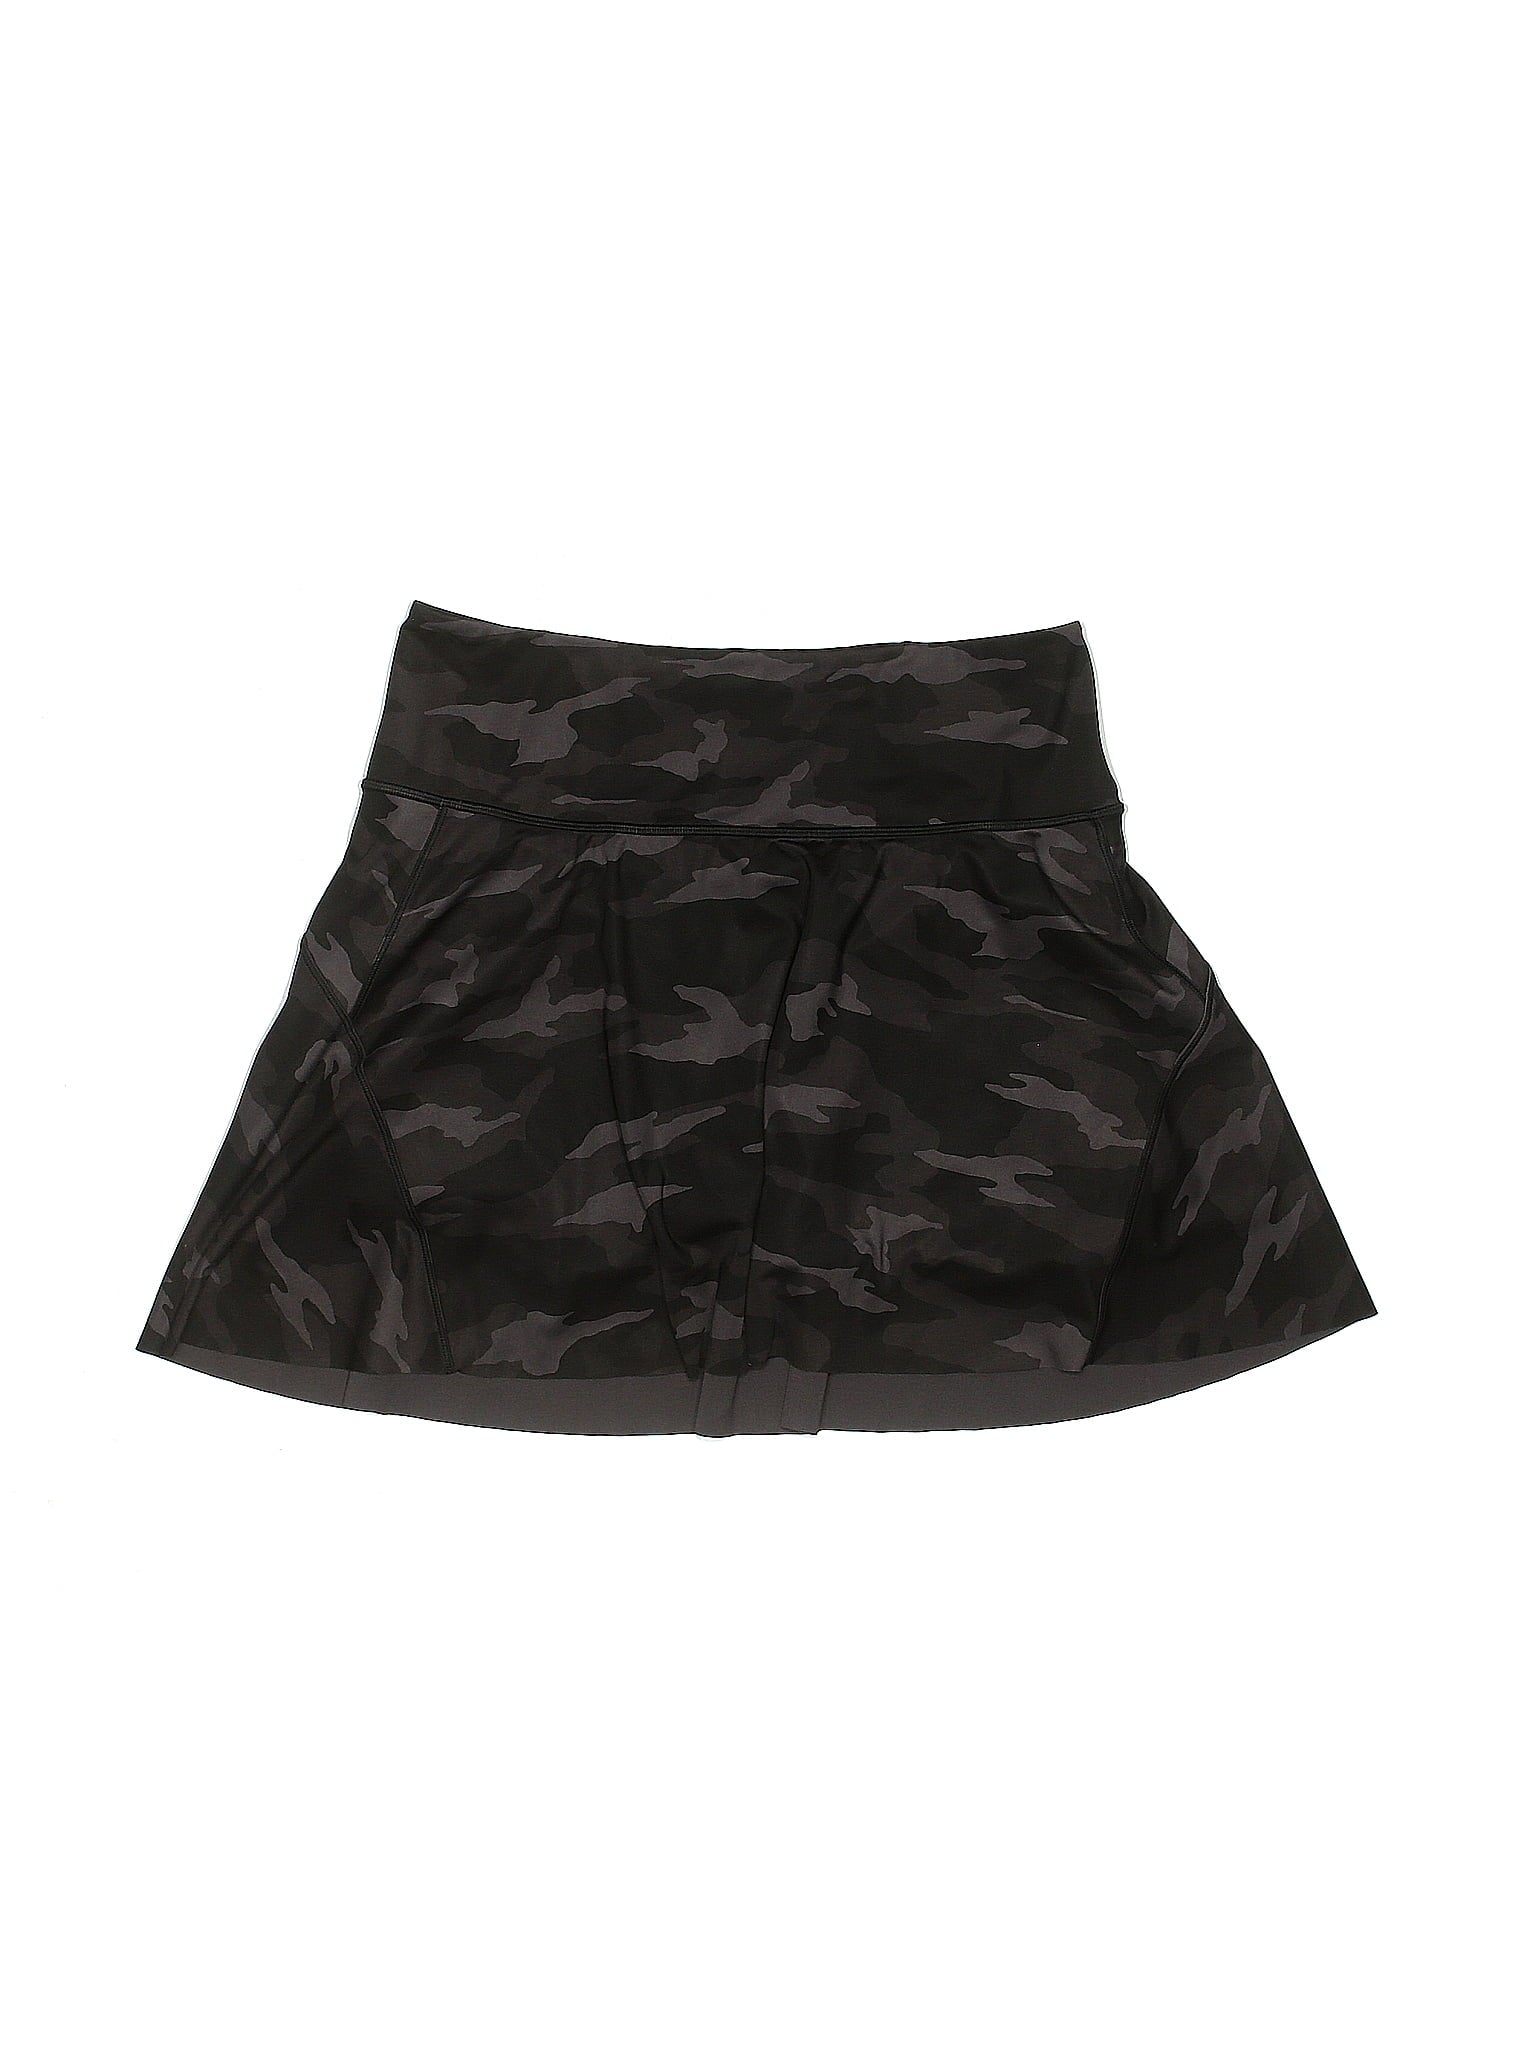 Active Skirt size - M